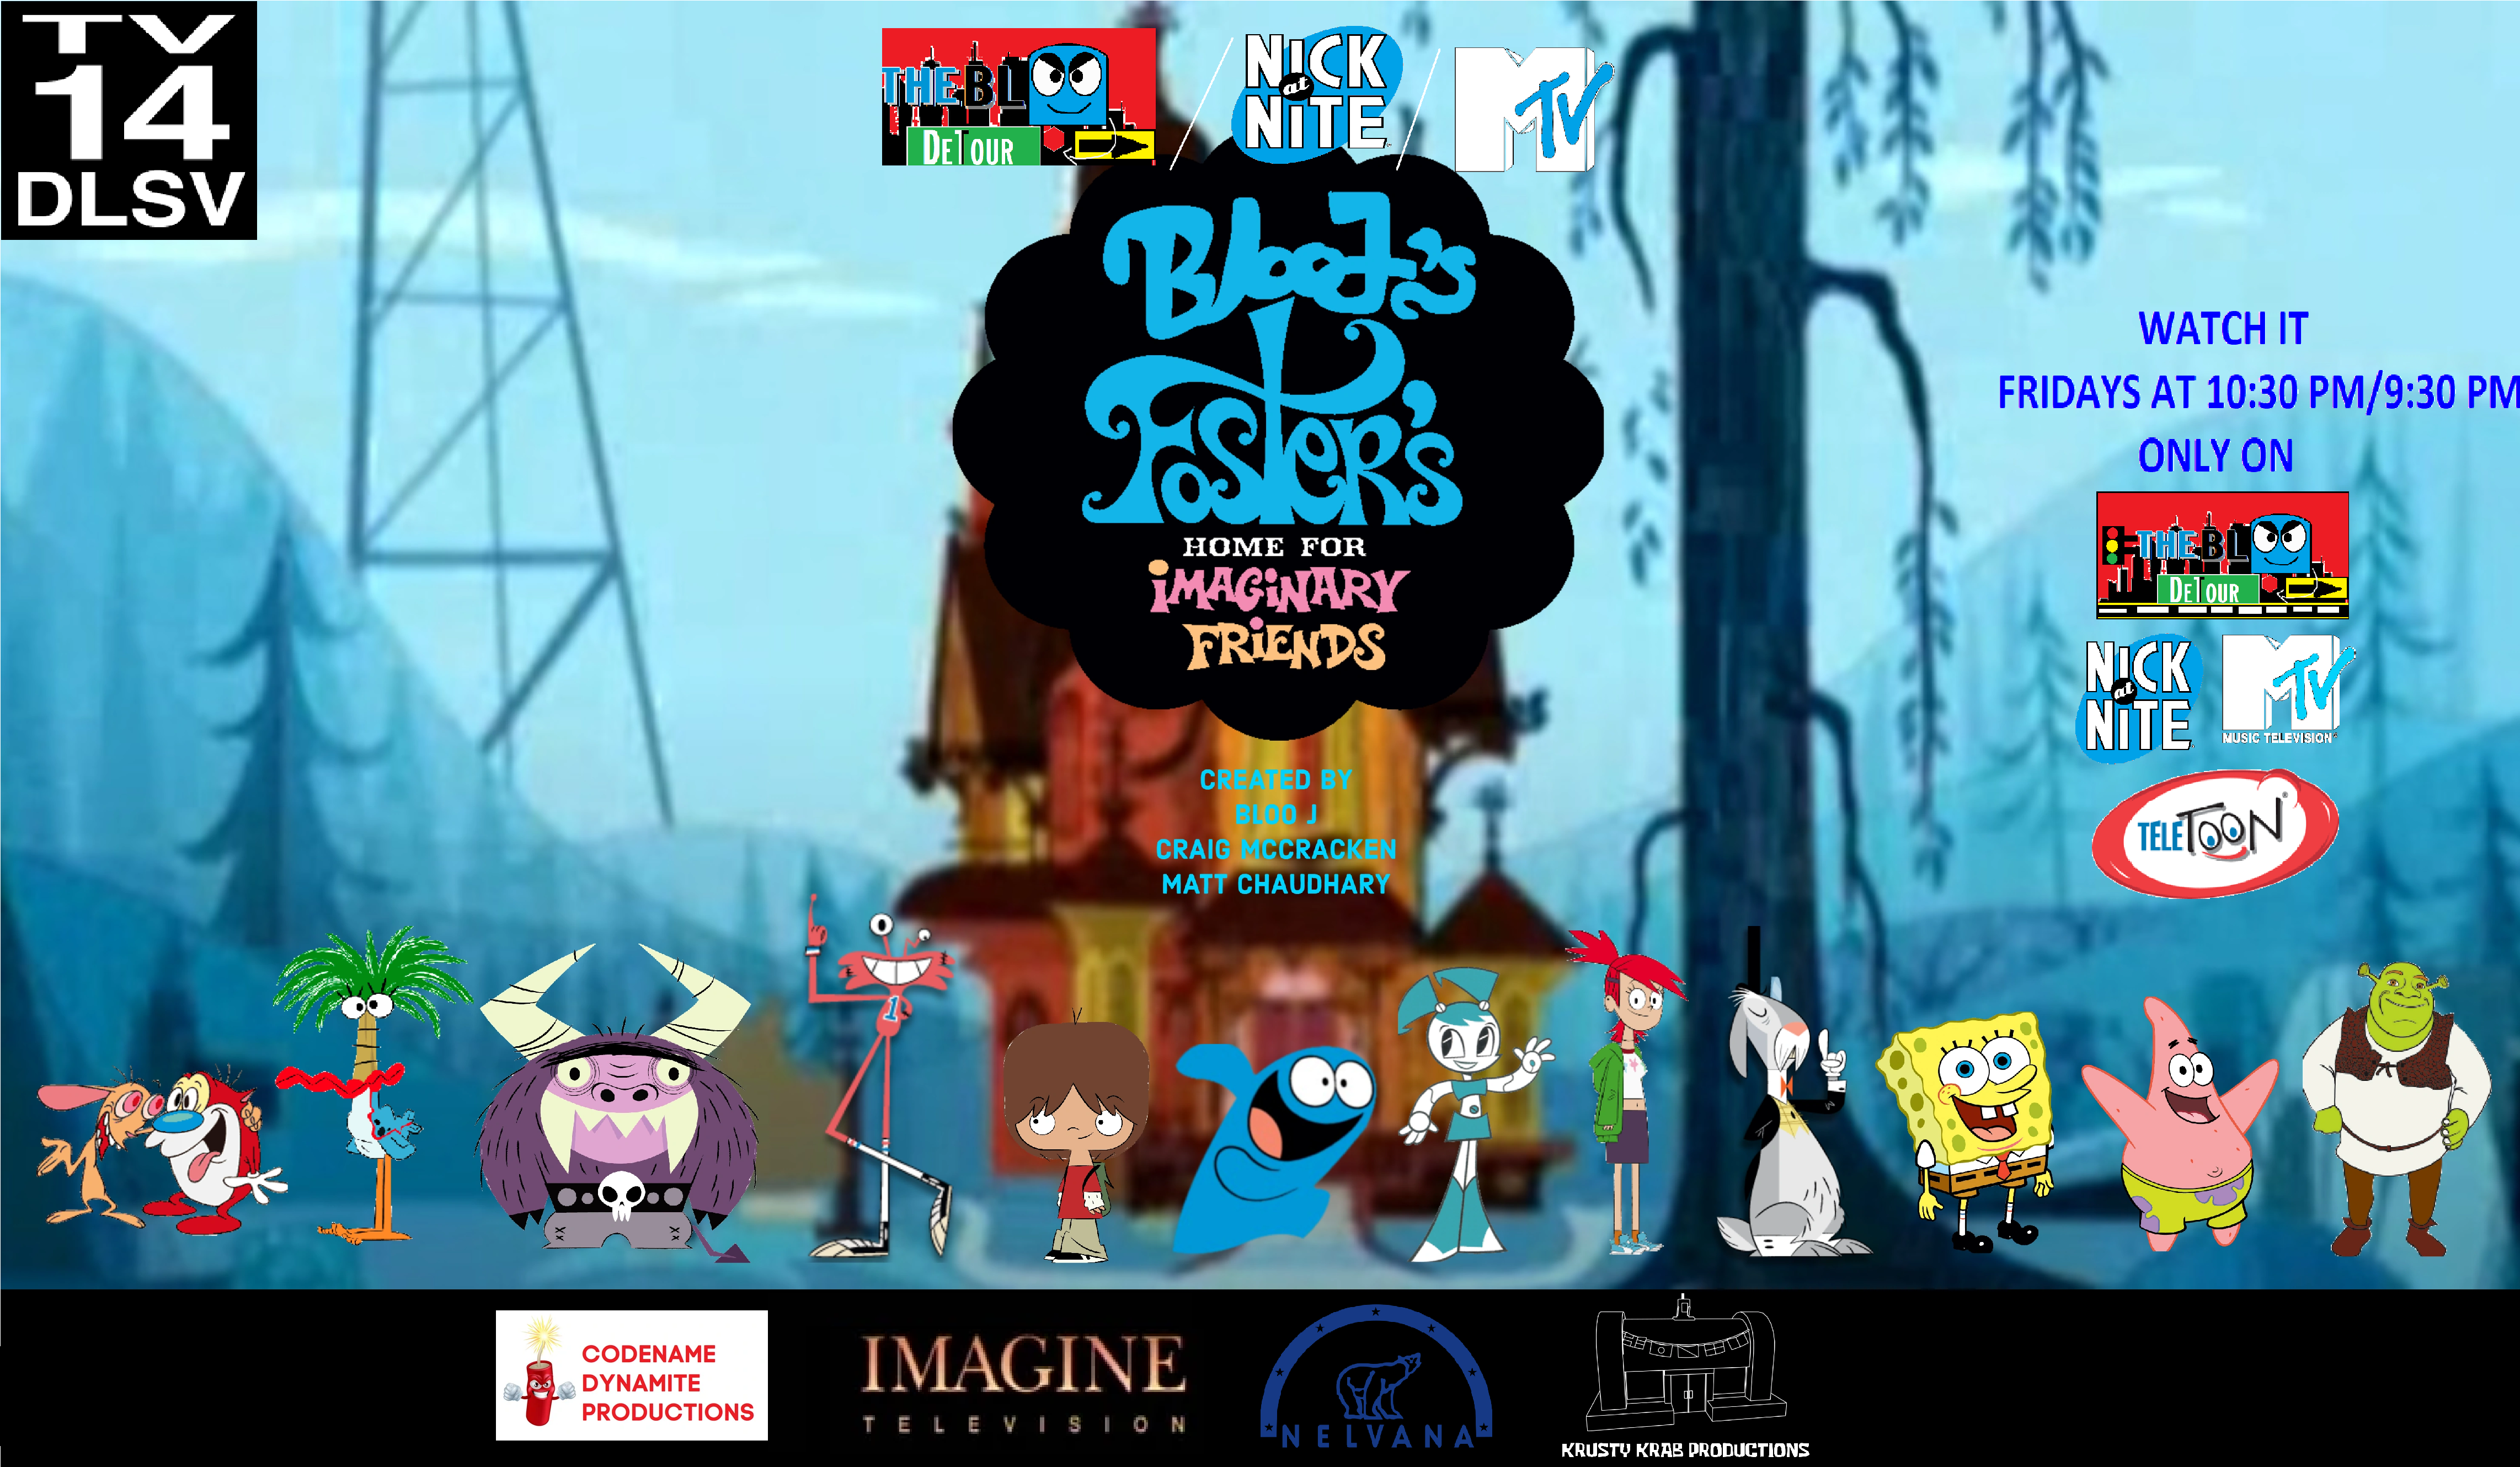 fosters home of imaginary friends online game